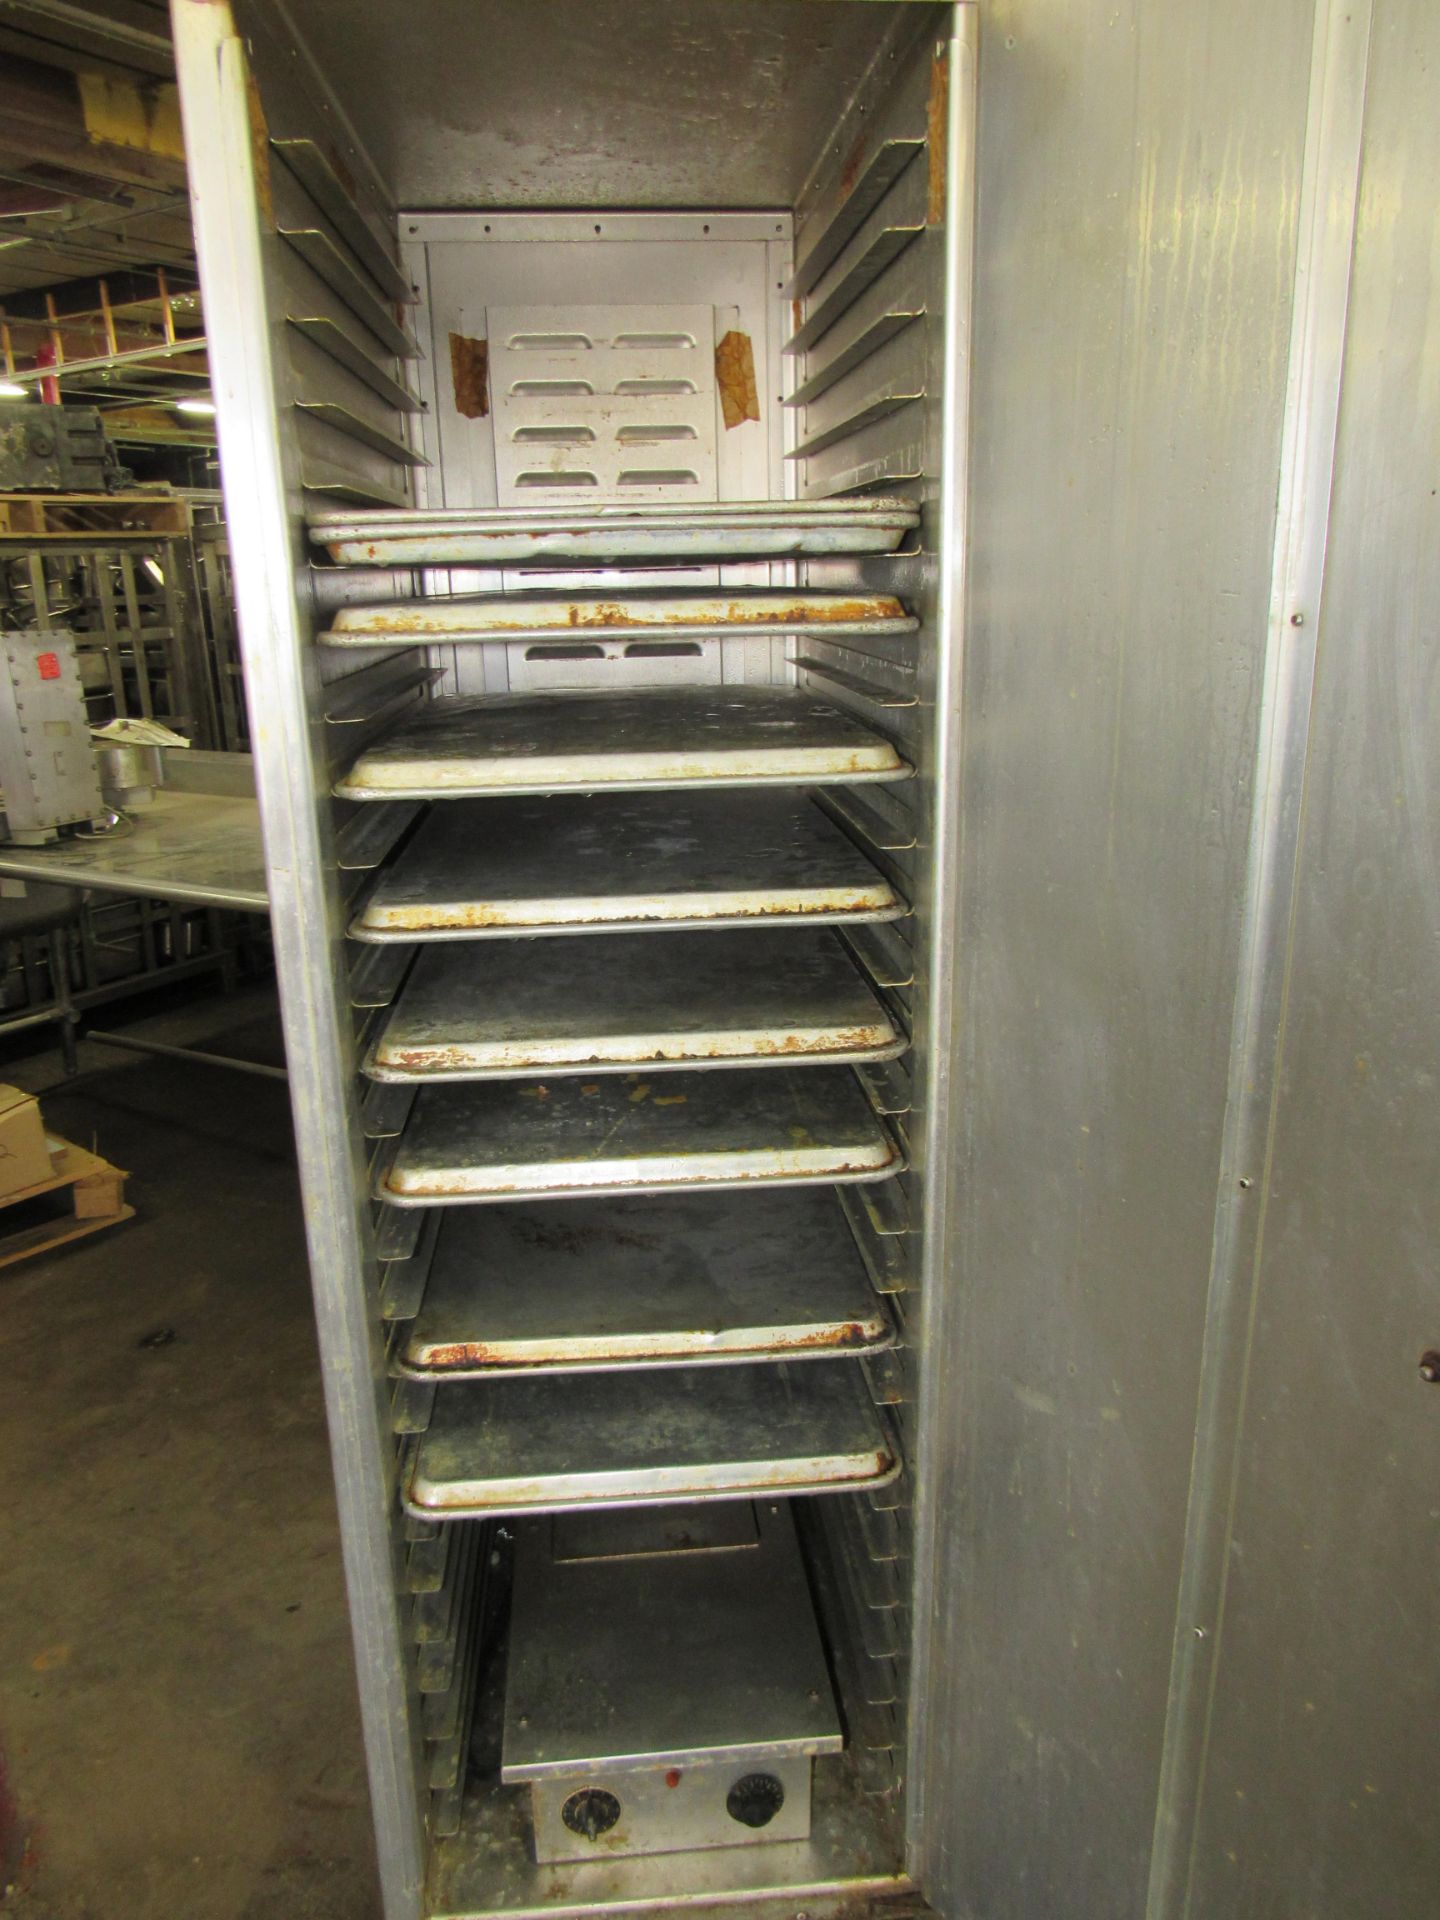 Alliance Mdl. 37223 Heated Proofer and Holding Cabinet, 27 spaces for 18" W X 26" L trays with (9) - Image 3 of 4